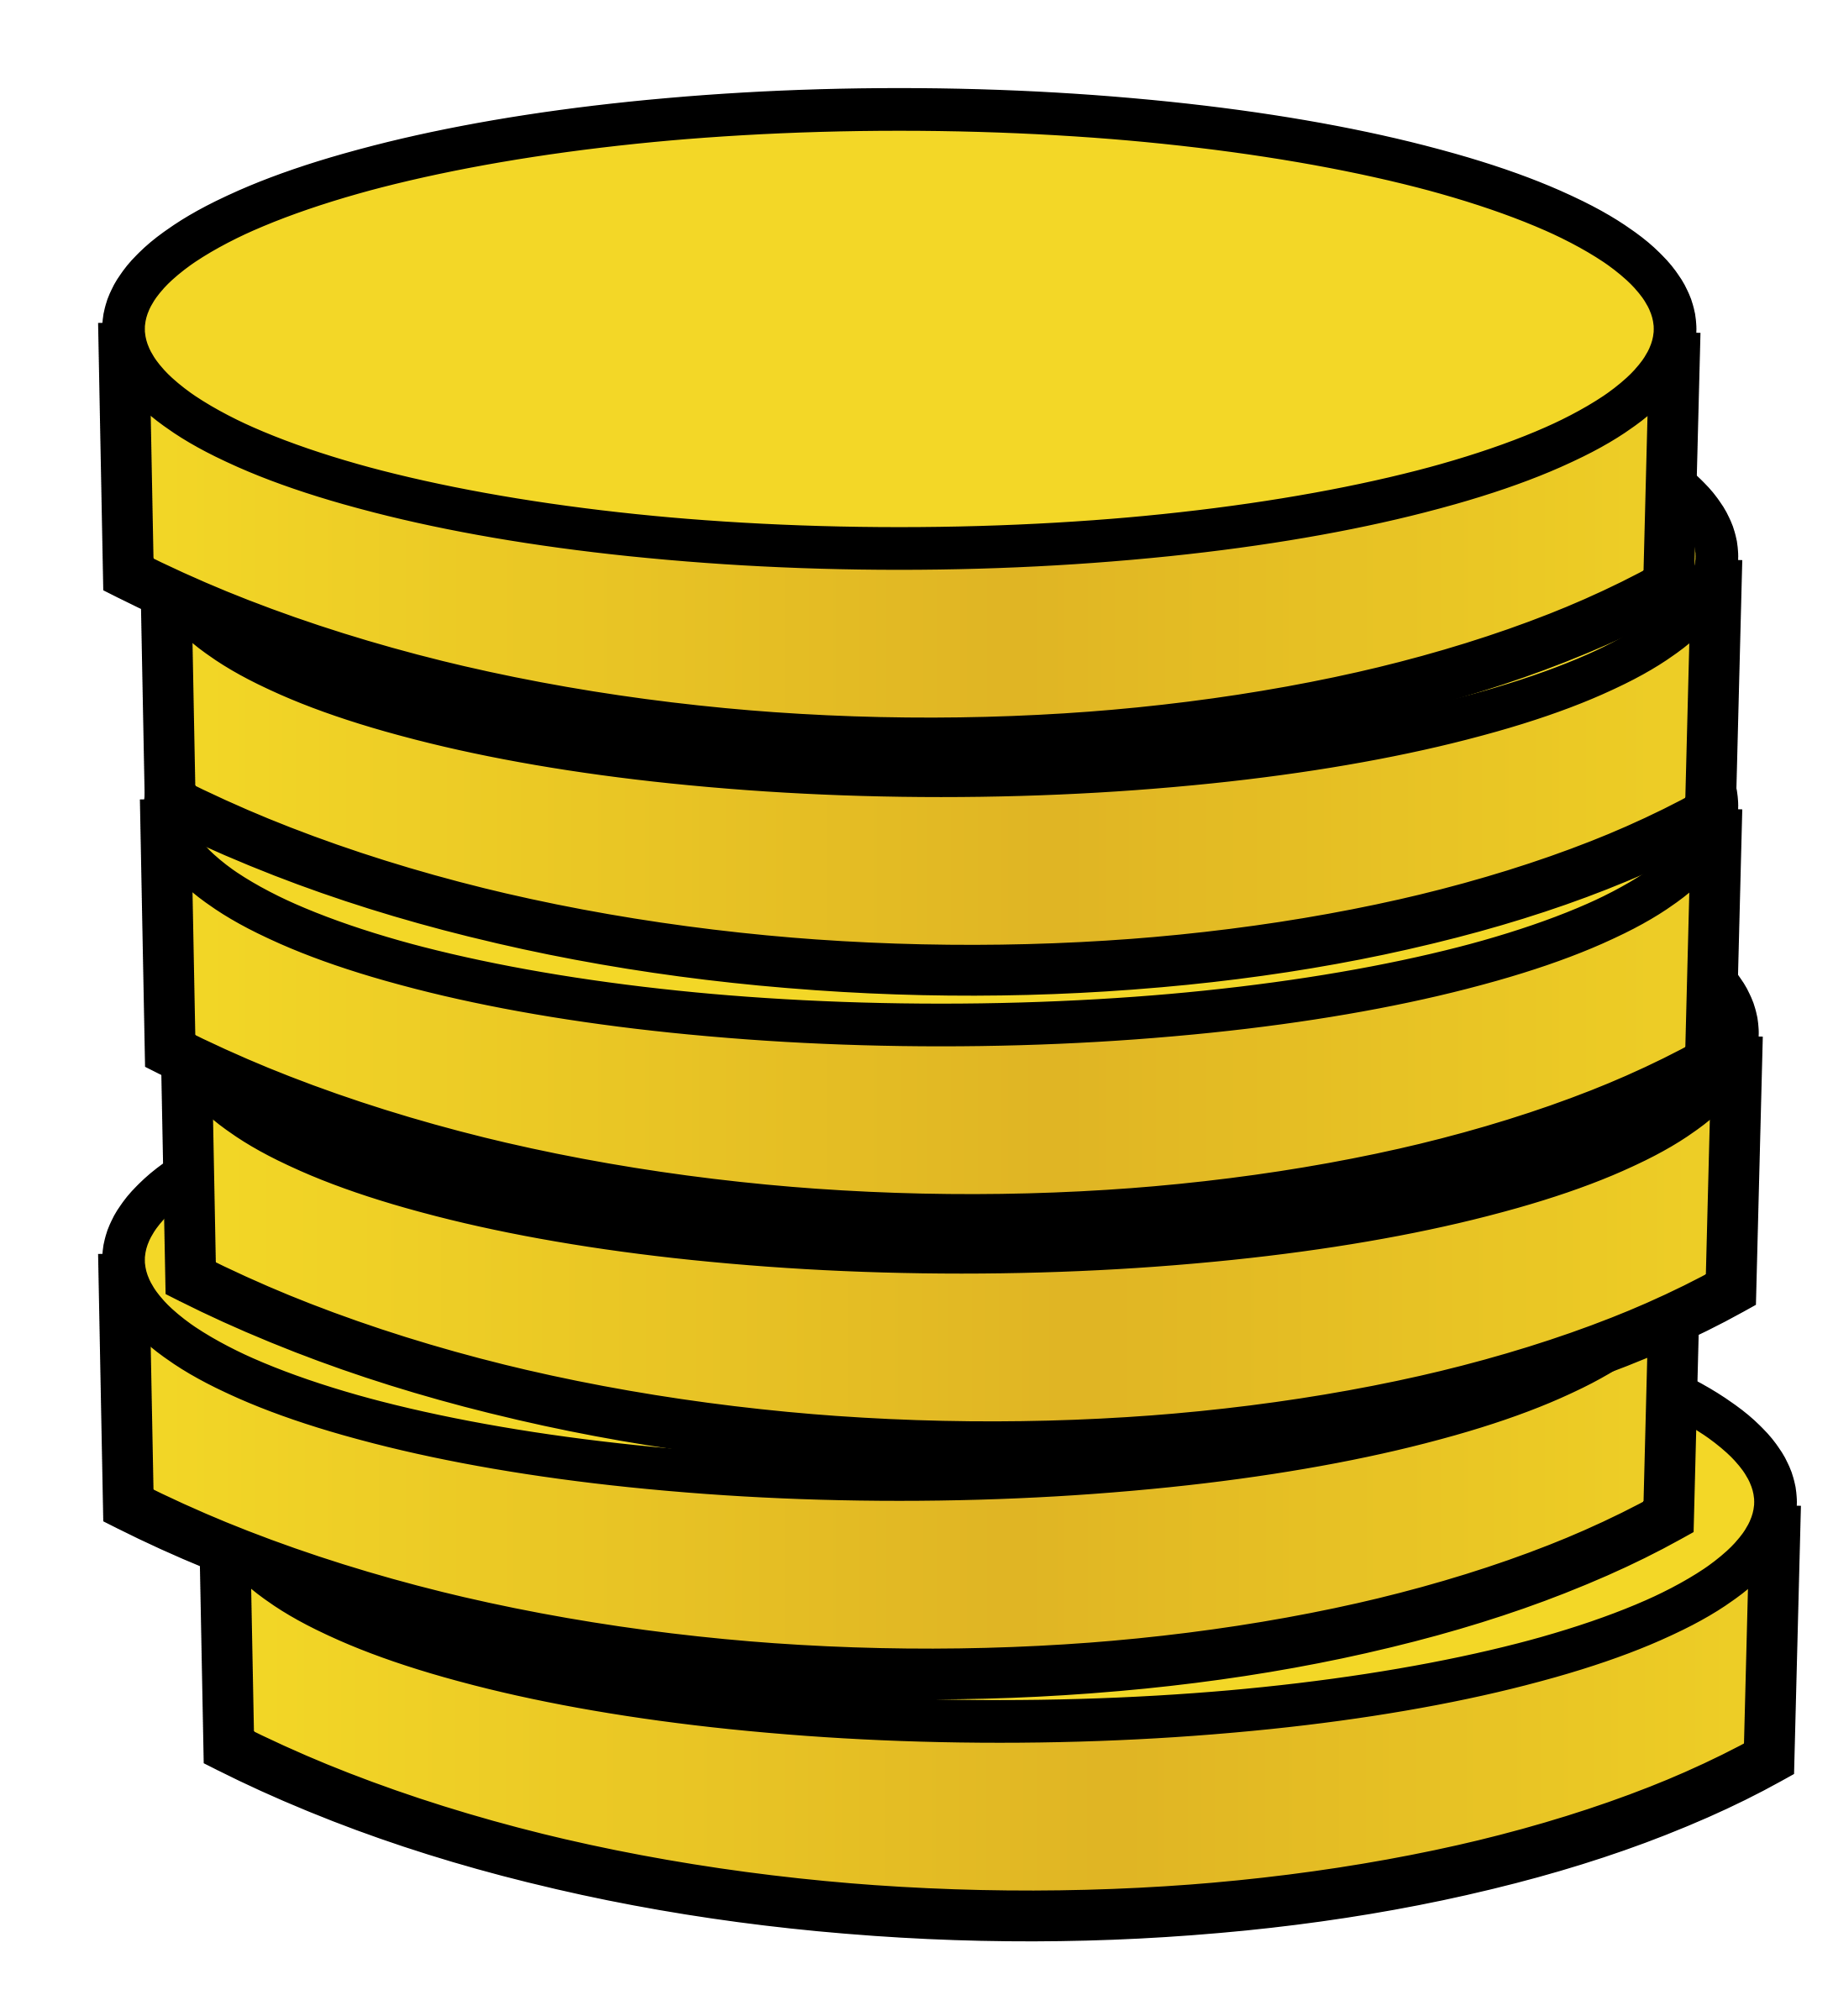 Gold coin Clipart - Free Clipart Images